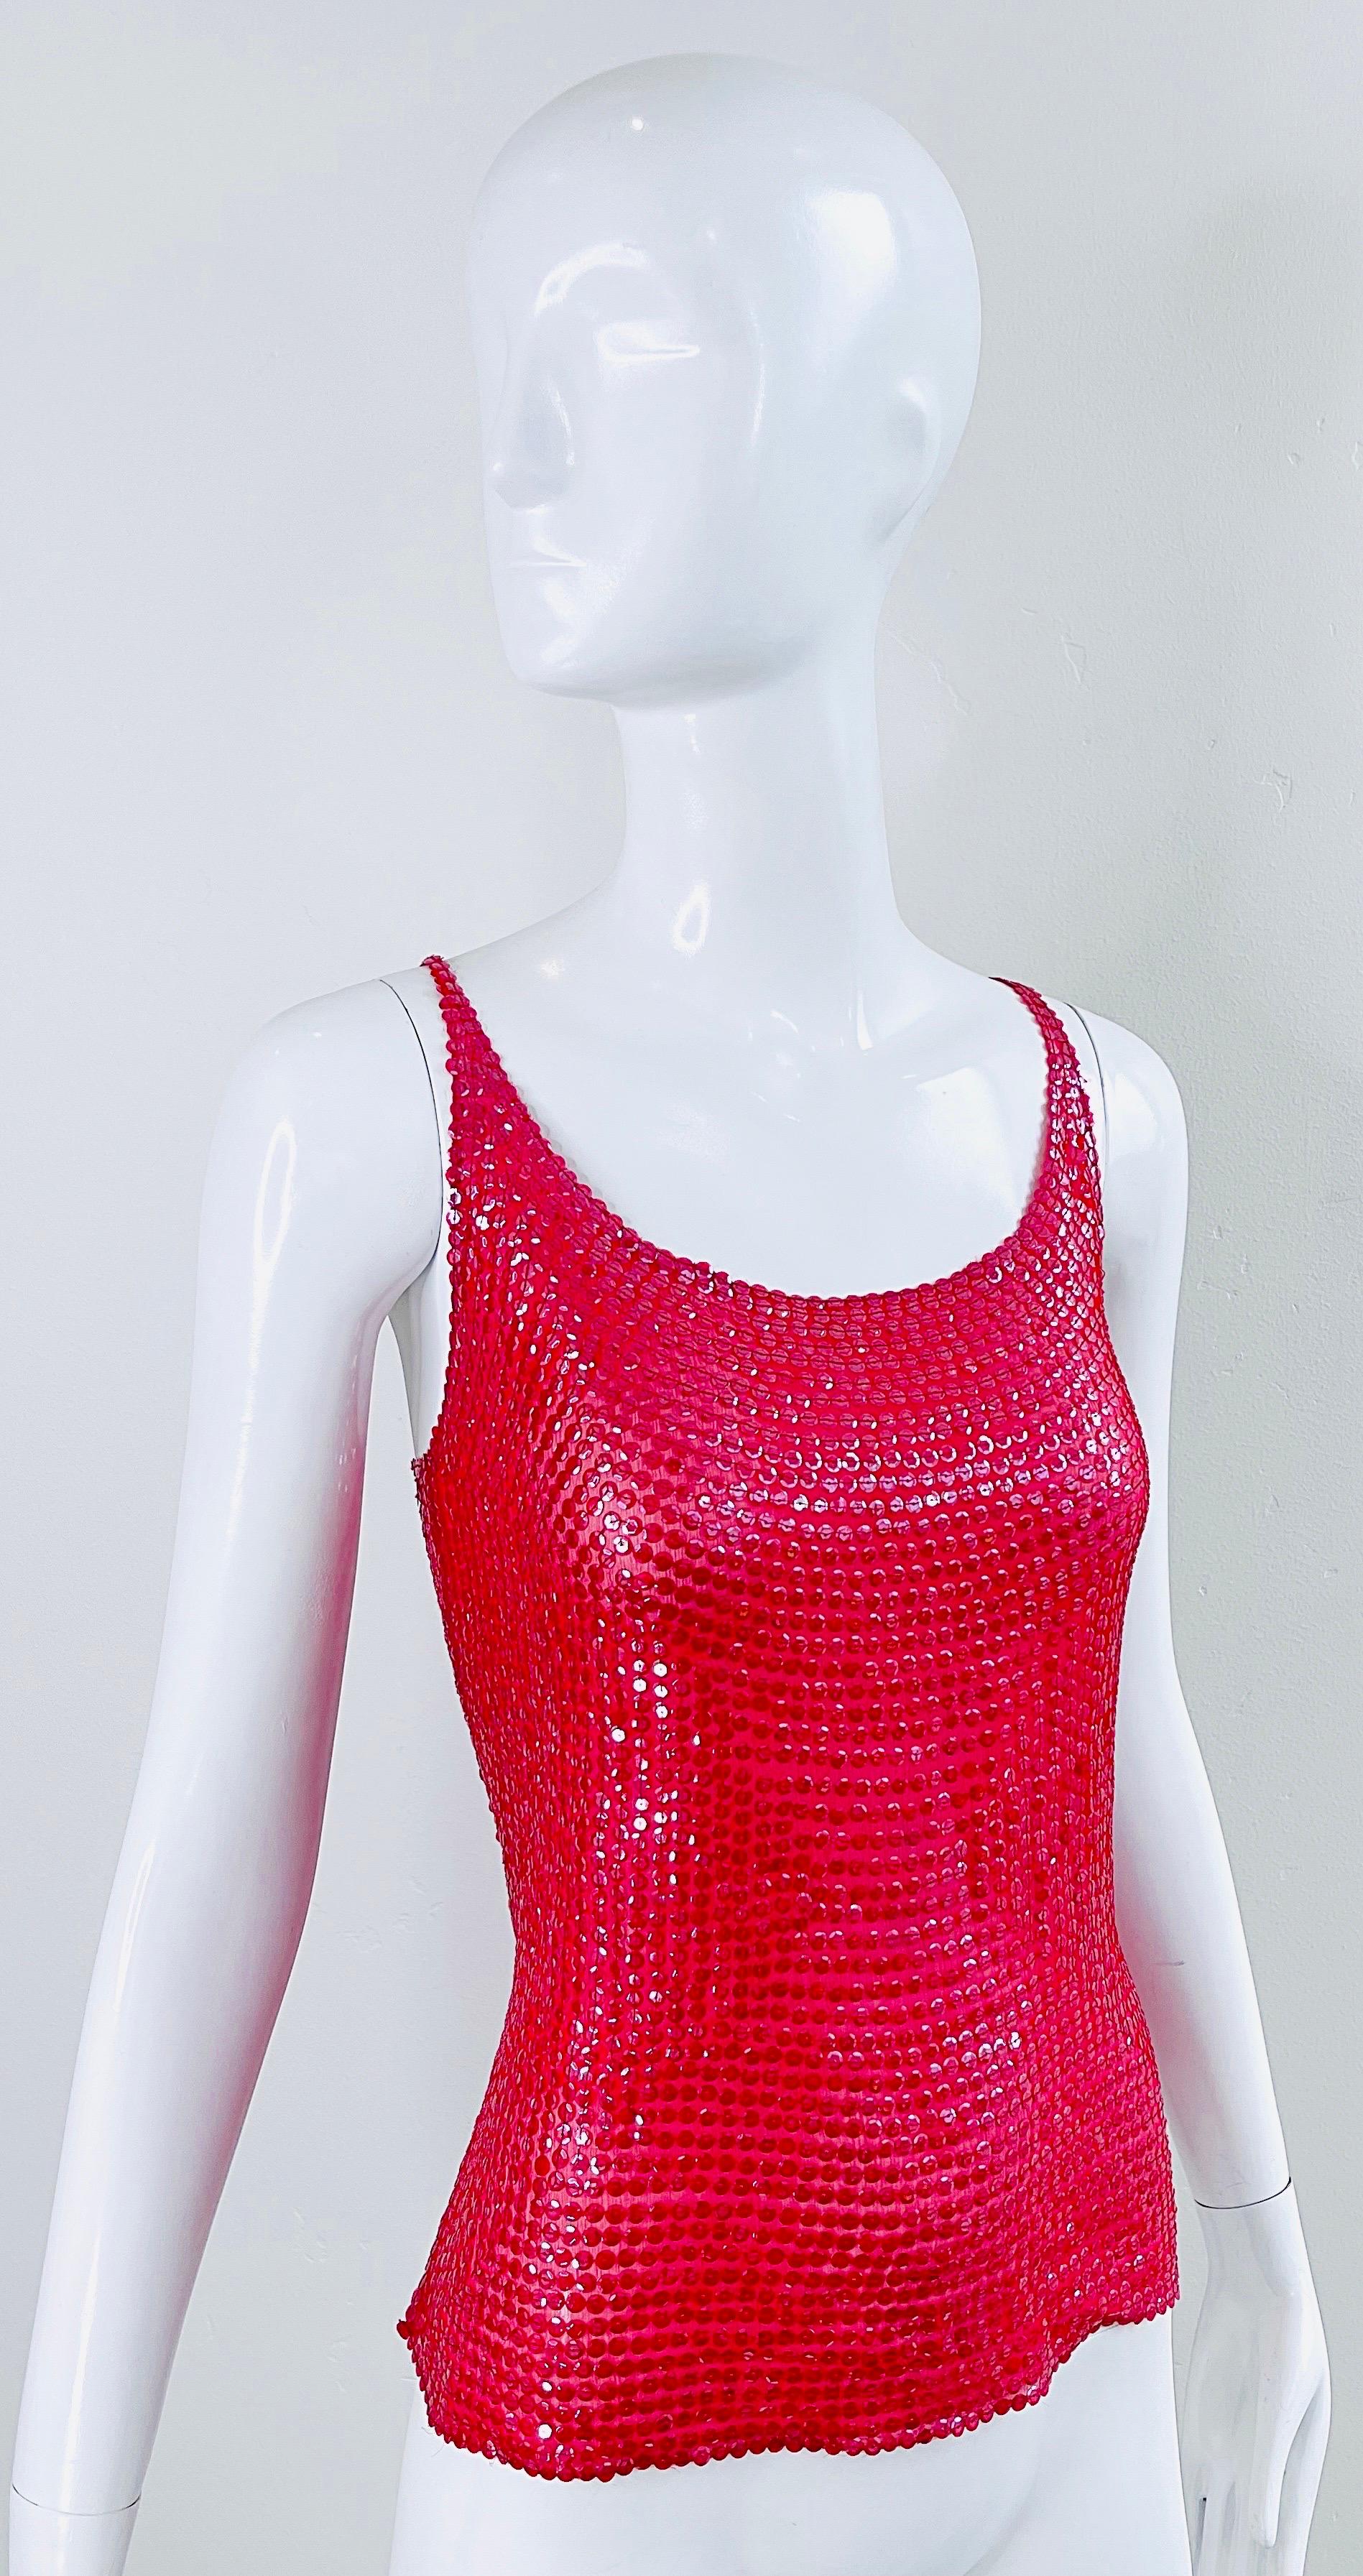 Halston 1970s Lipstick Red Silk Chiffon Fully Sequin Vintage 70s Sleeveless Top For Sale 9